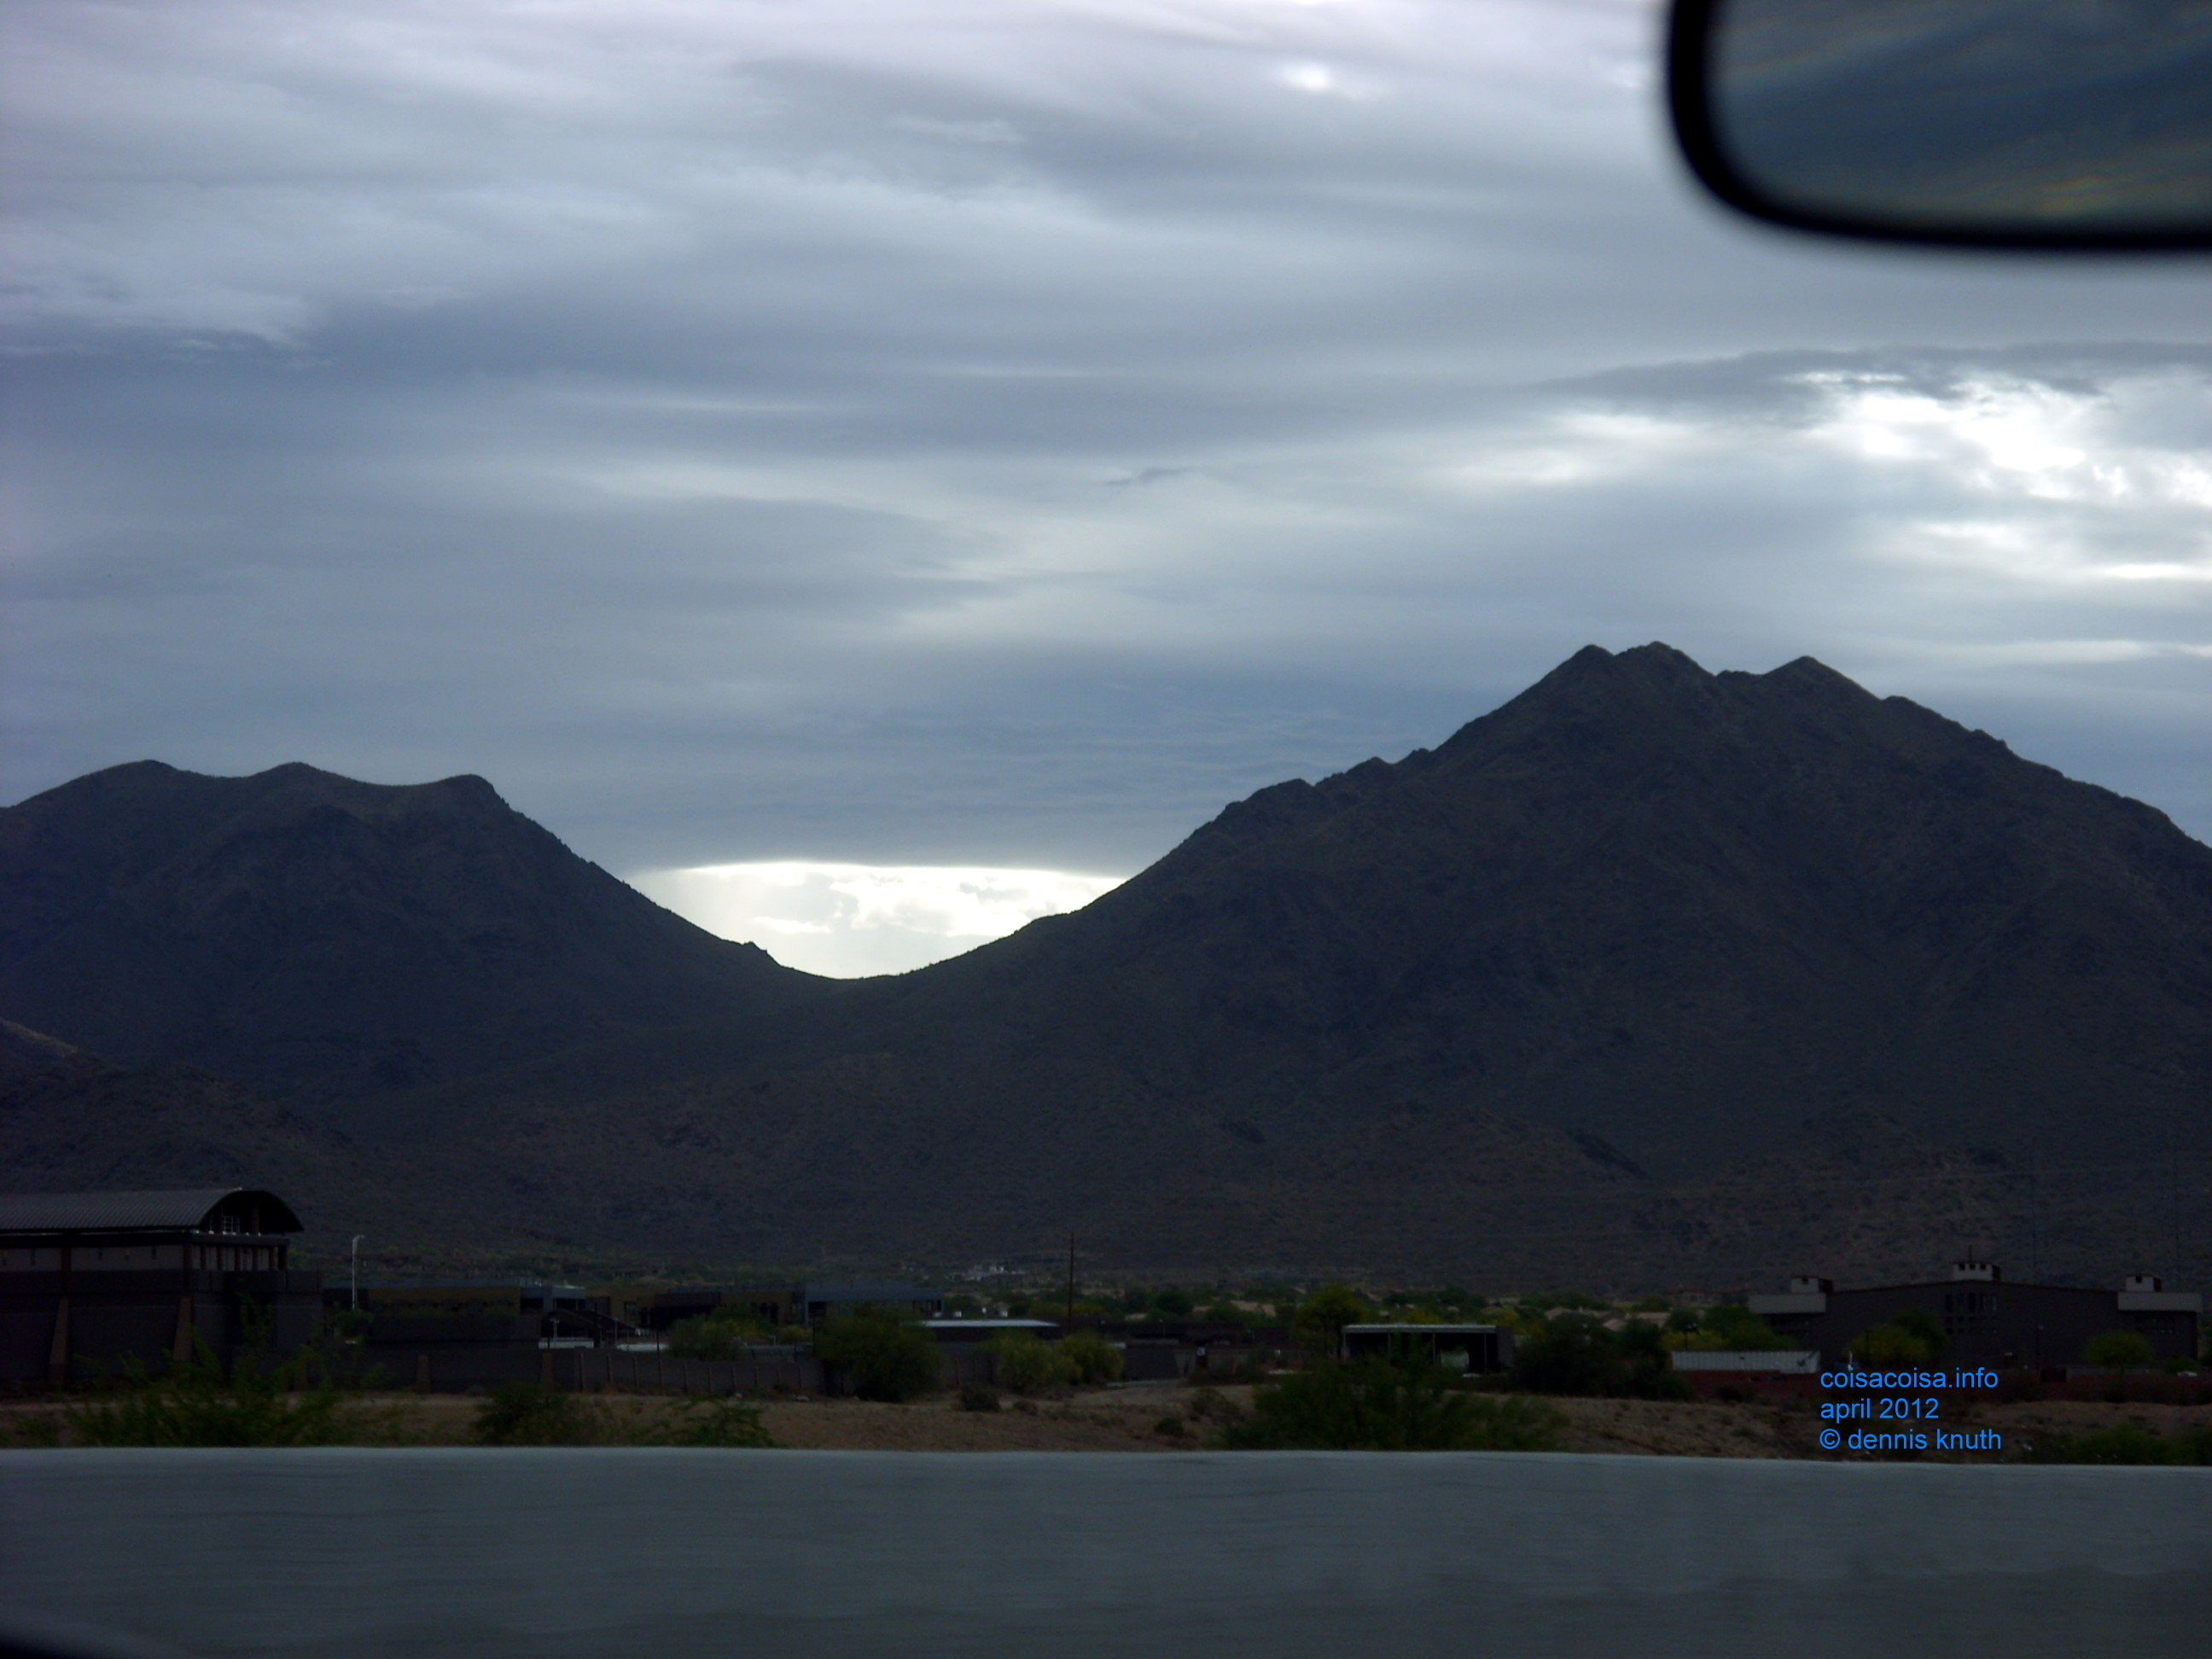 Heading out to tour the Superstition Mountains in 2012